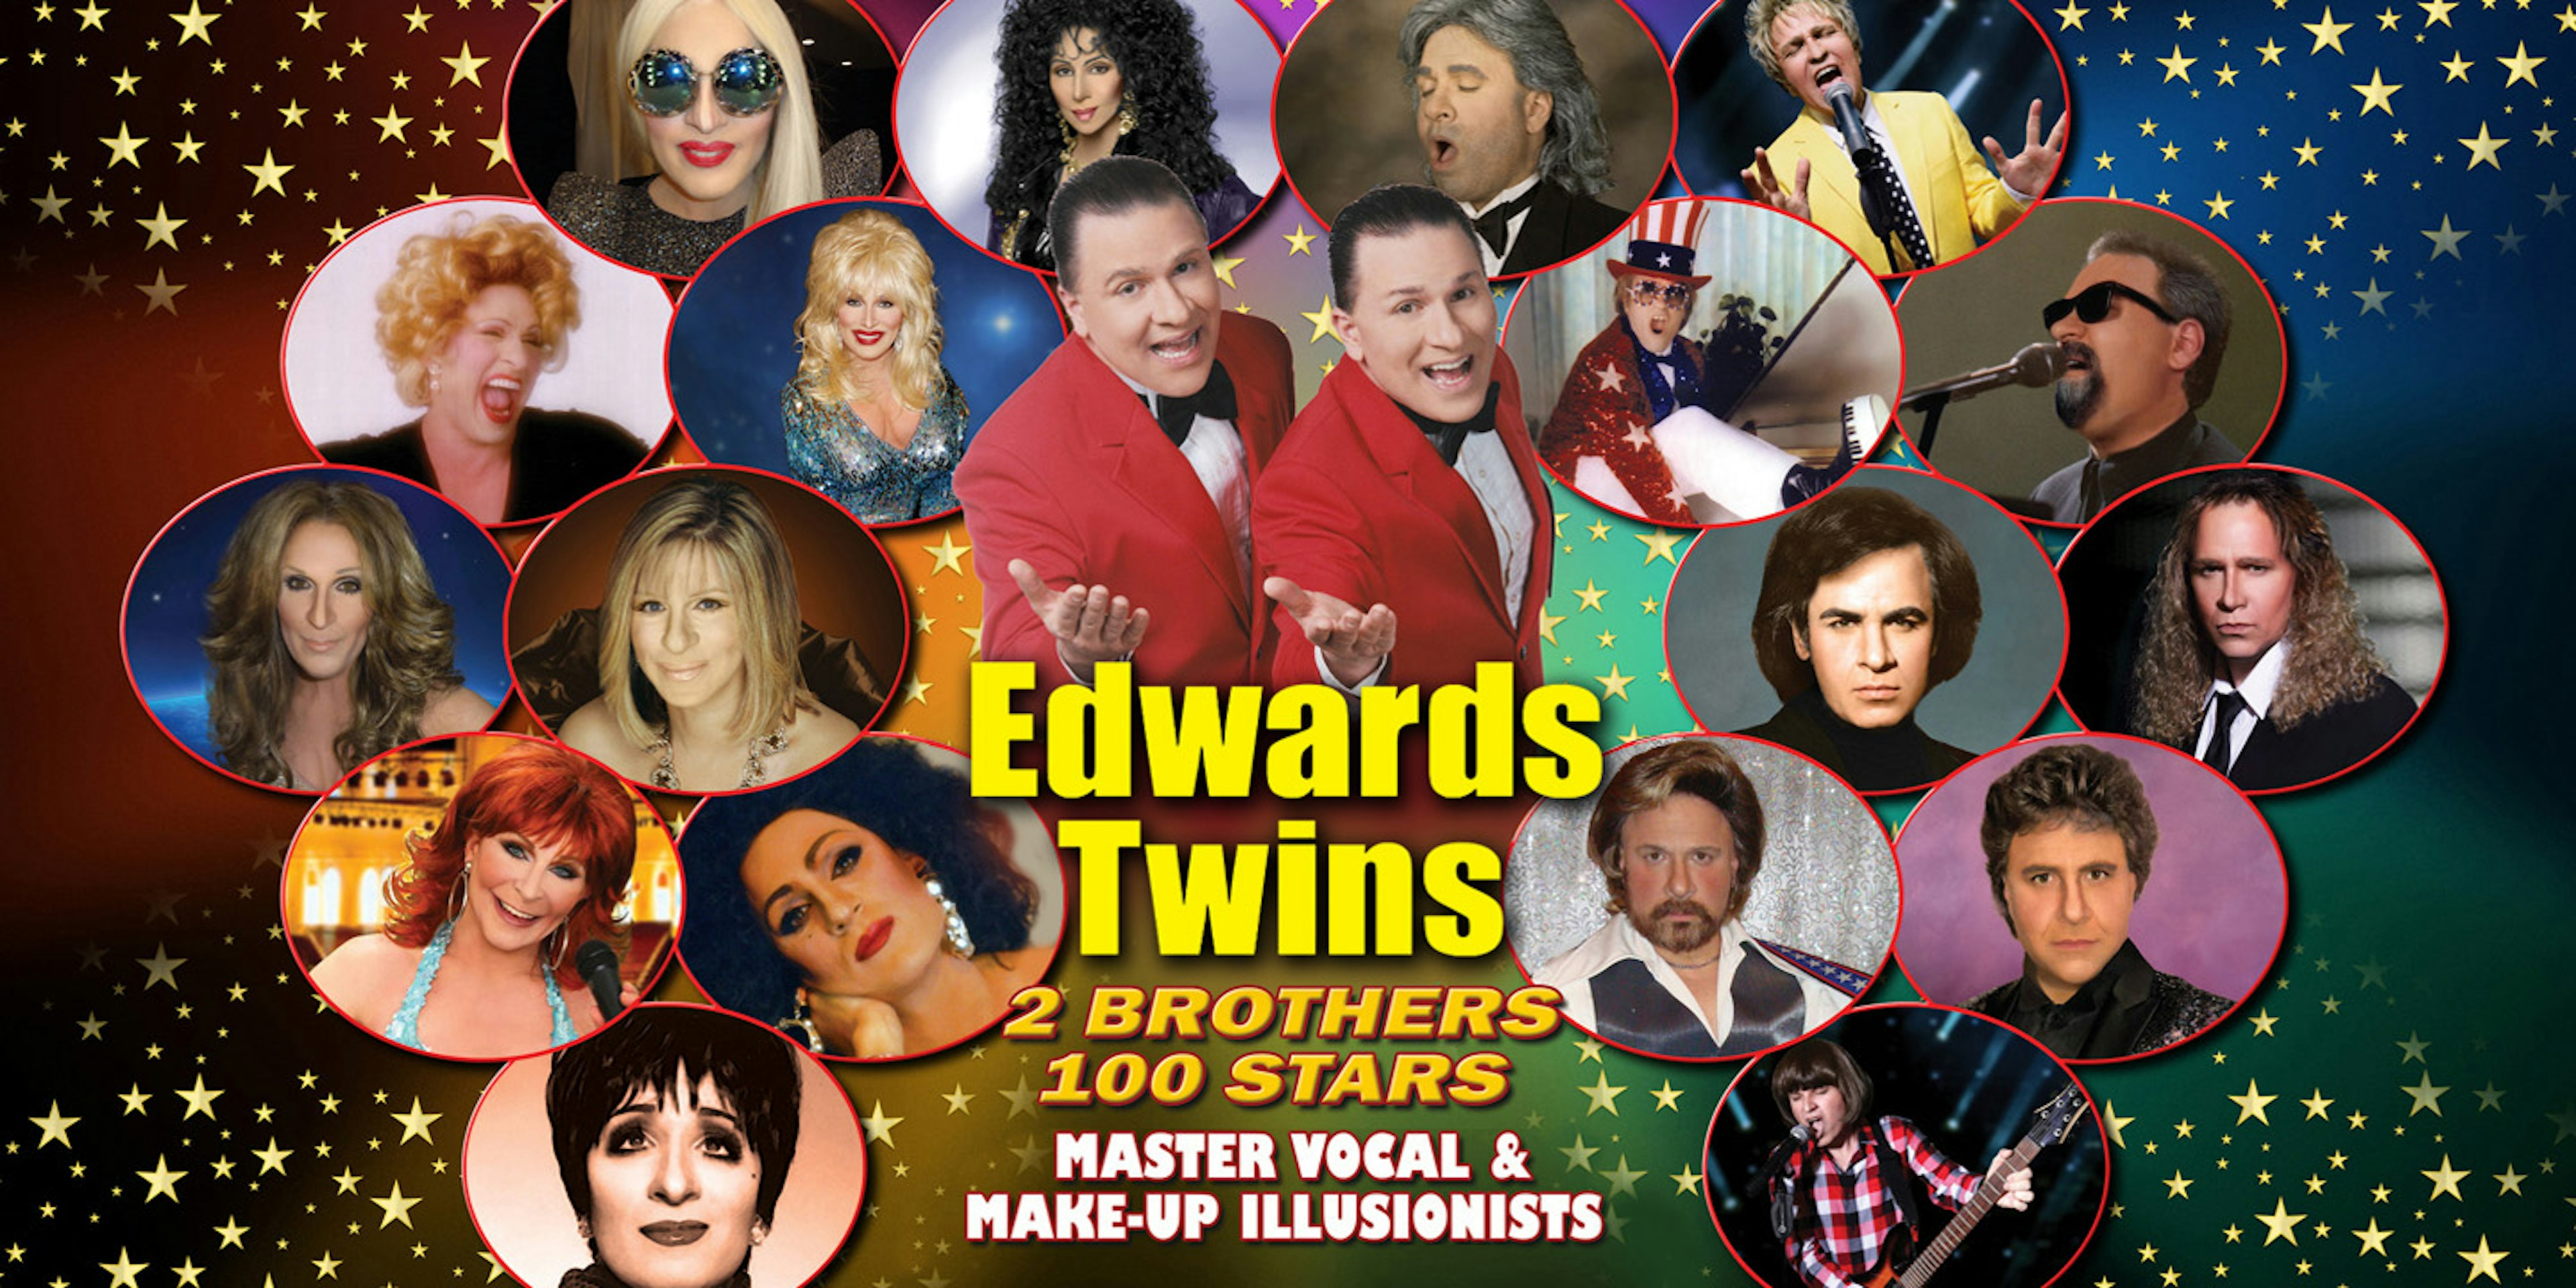 Edwards Twins at The Alabama Theatre